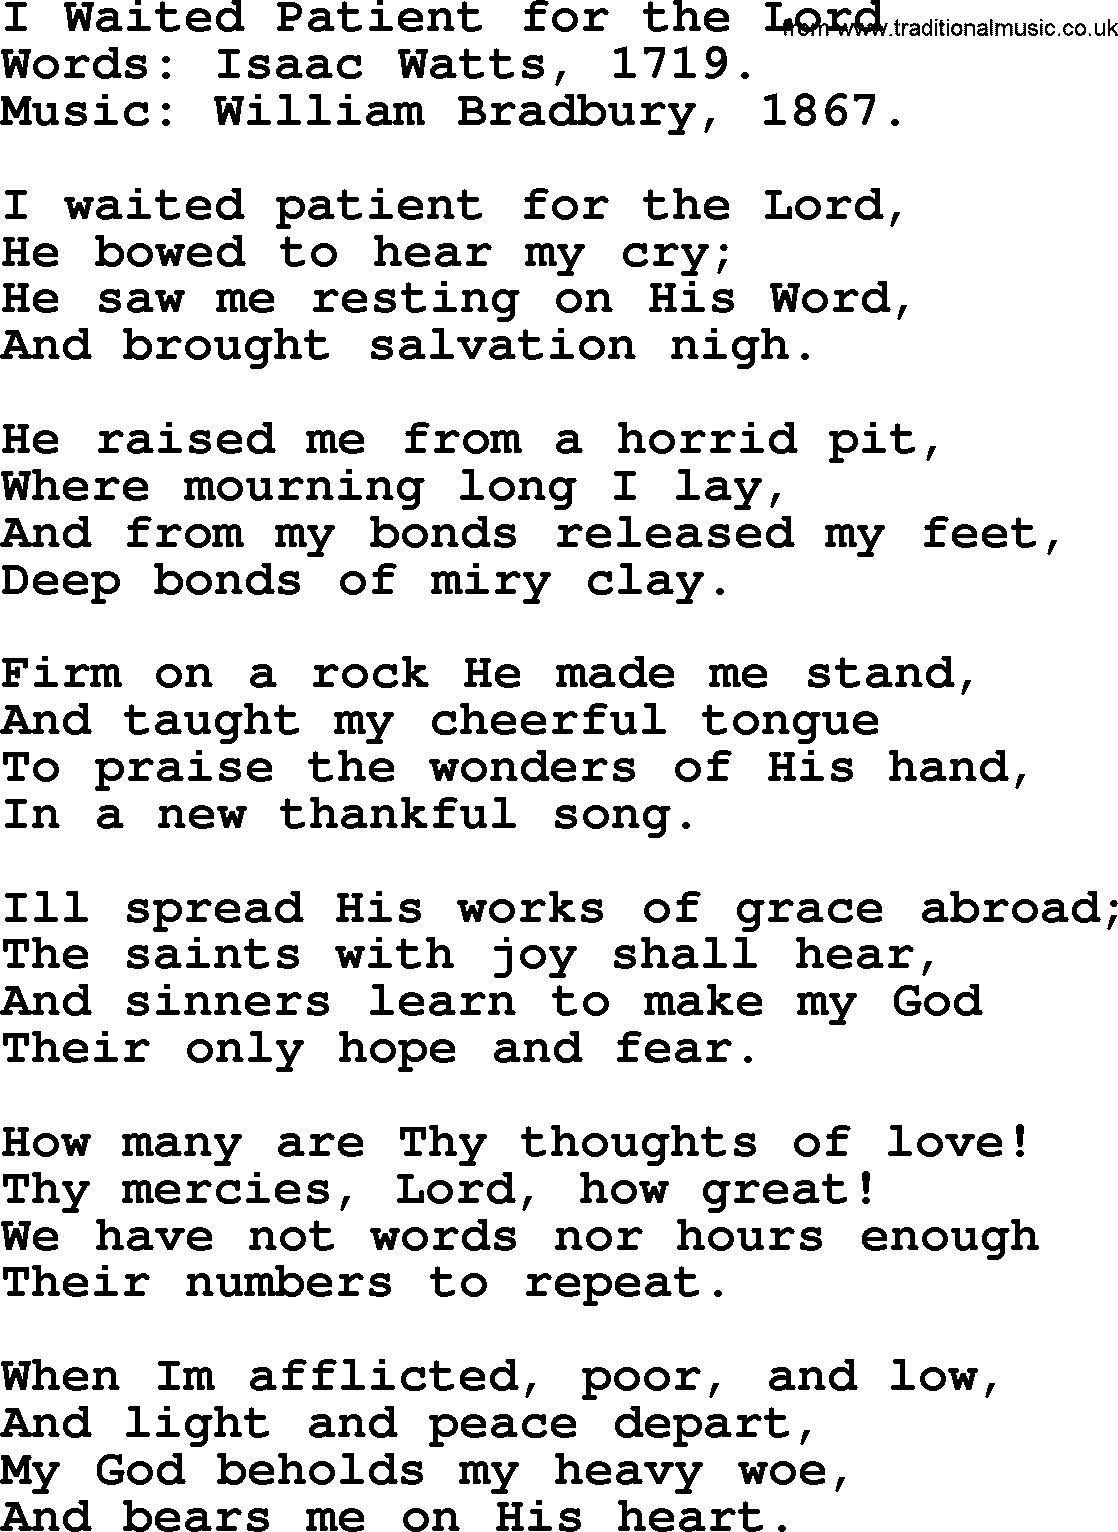 Isaac Watts Christian hymn: I Waited Patient for the Lord- lyricss